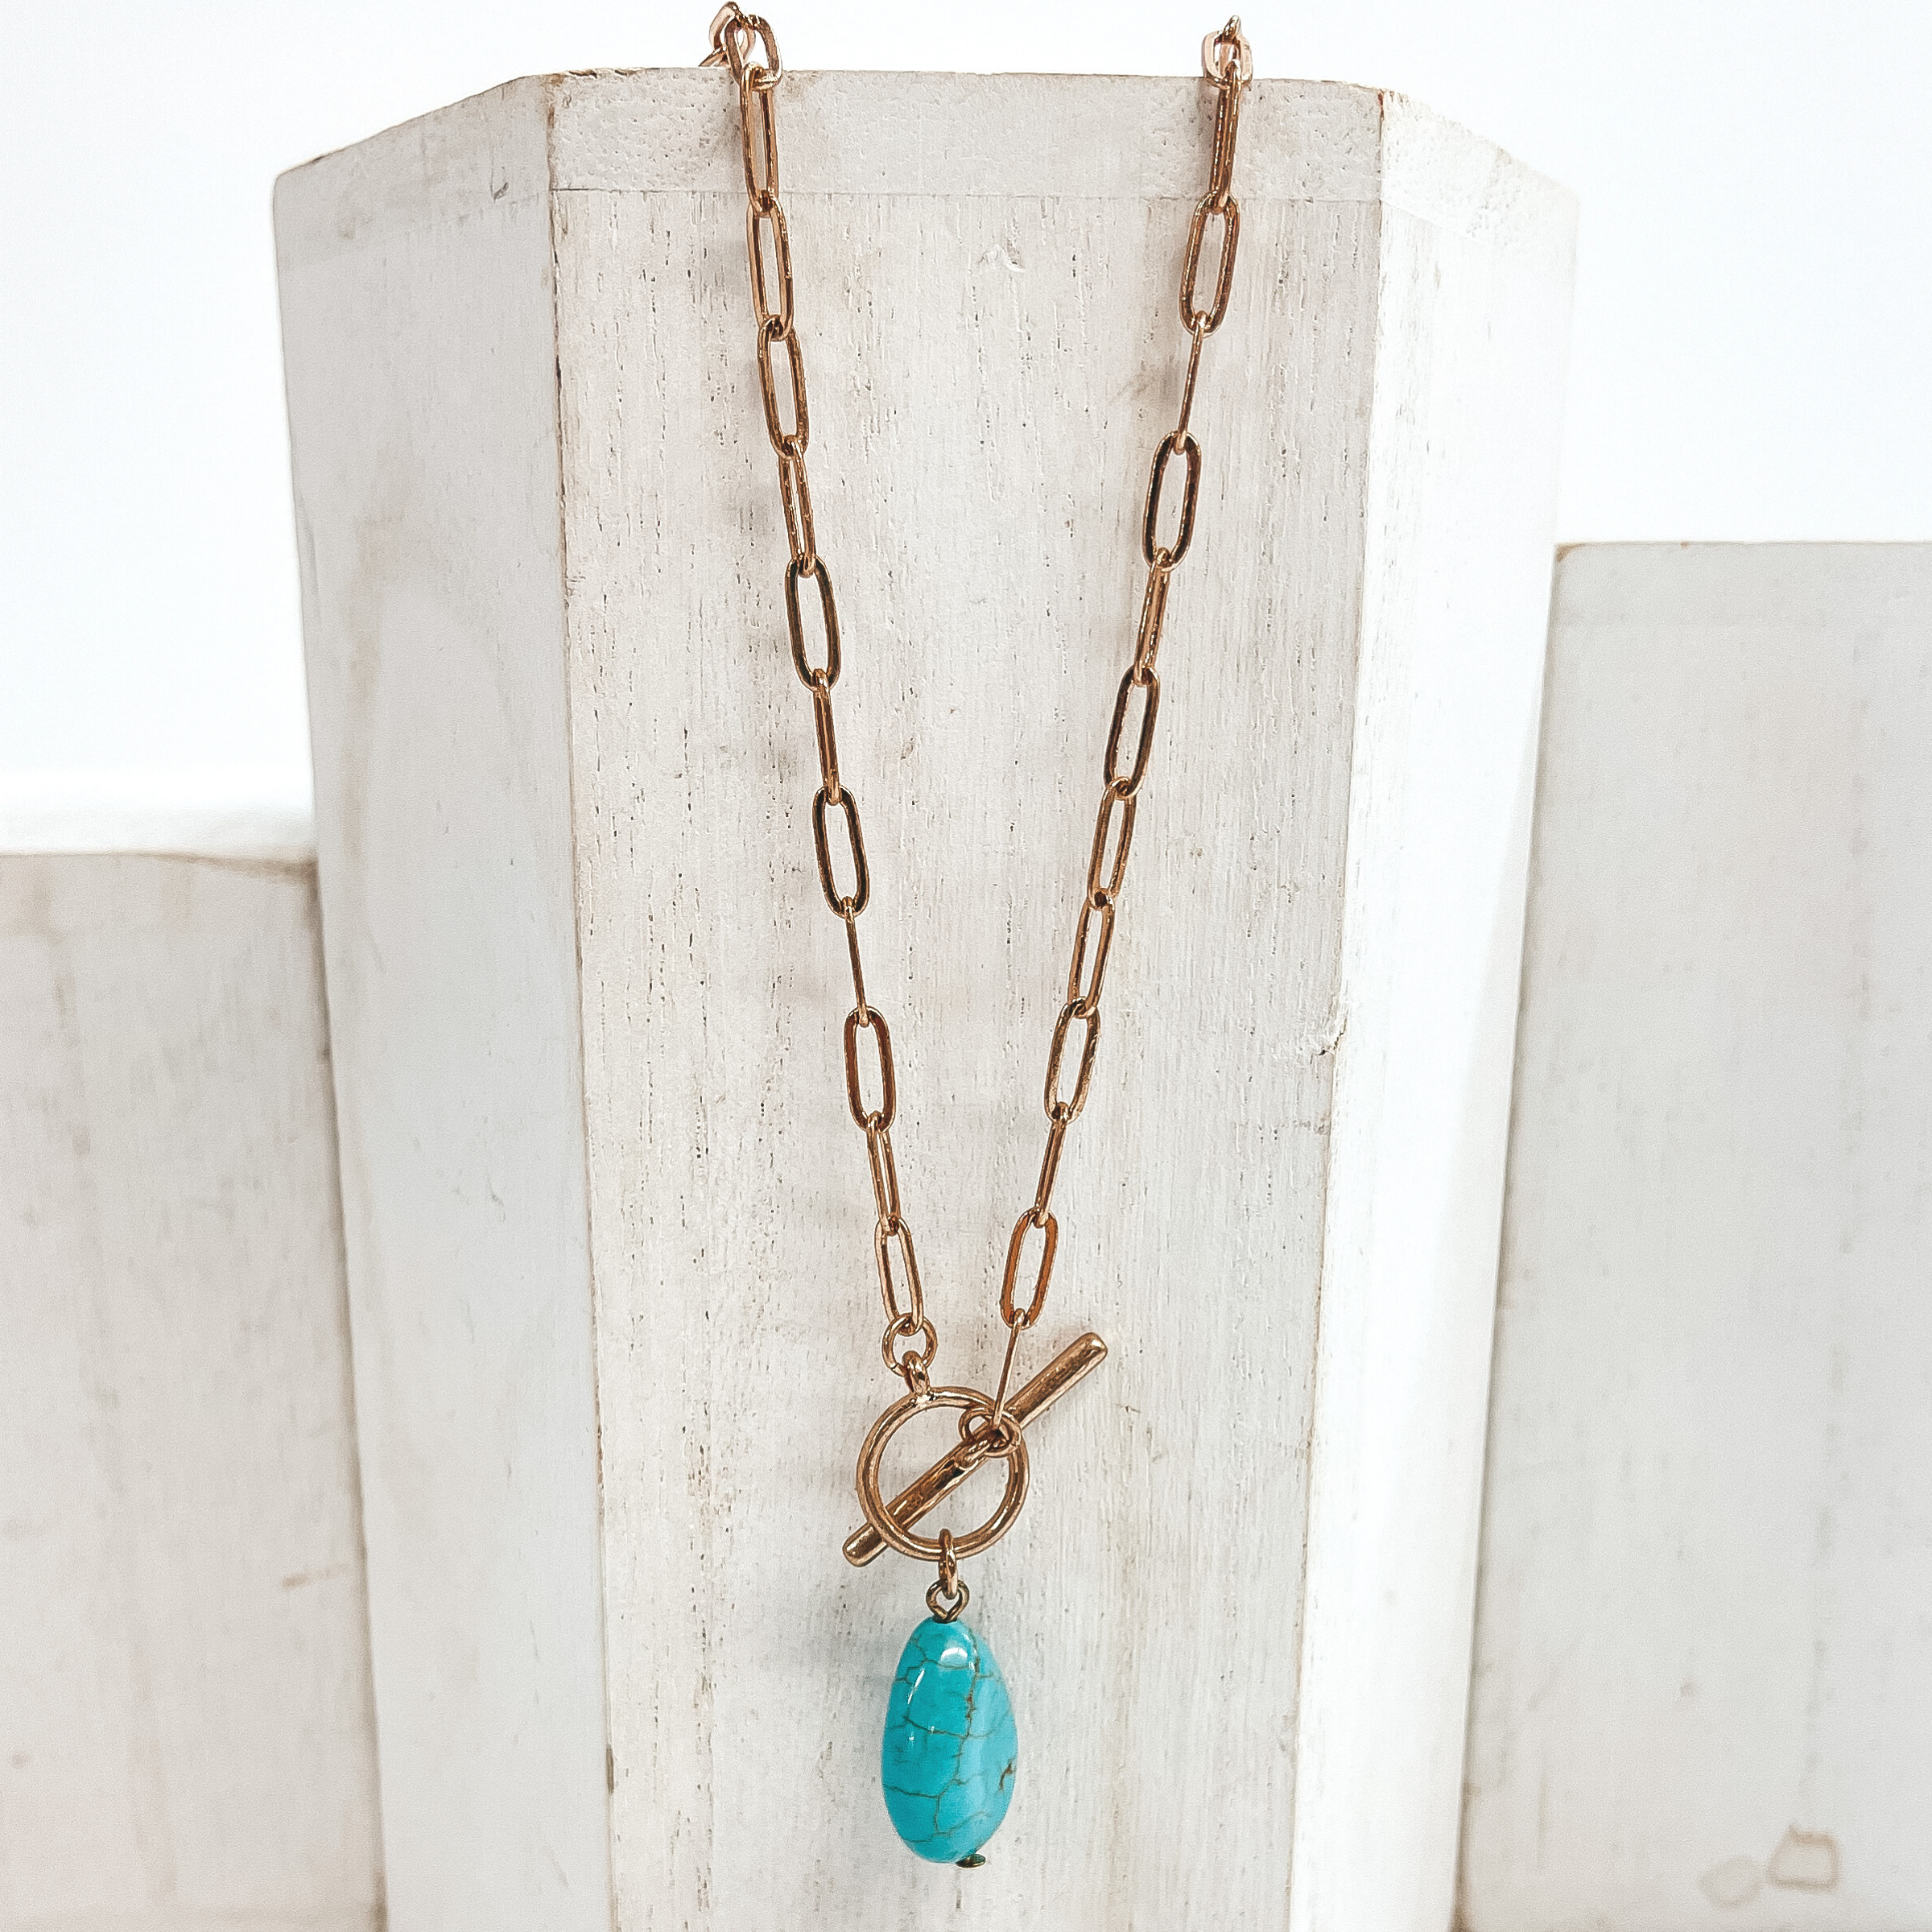 Gold paperclip chain necklace with toggle clasp and  natural stone teardrop pendant in turquoise.  Taken on  a white block and white background.